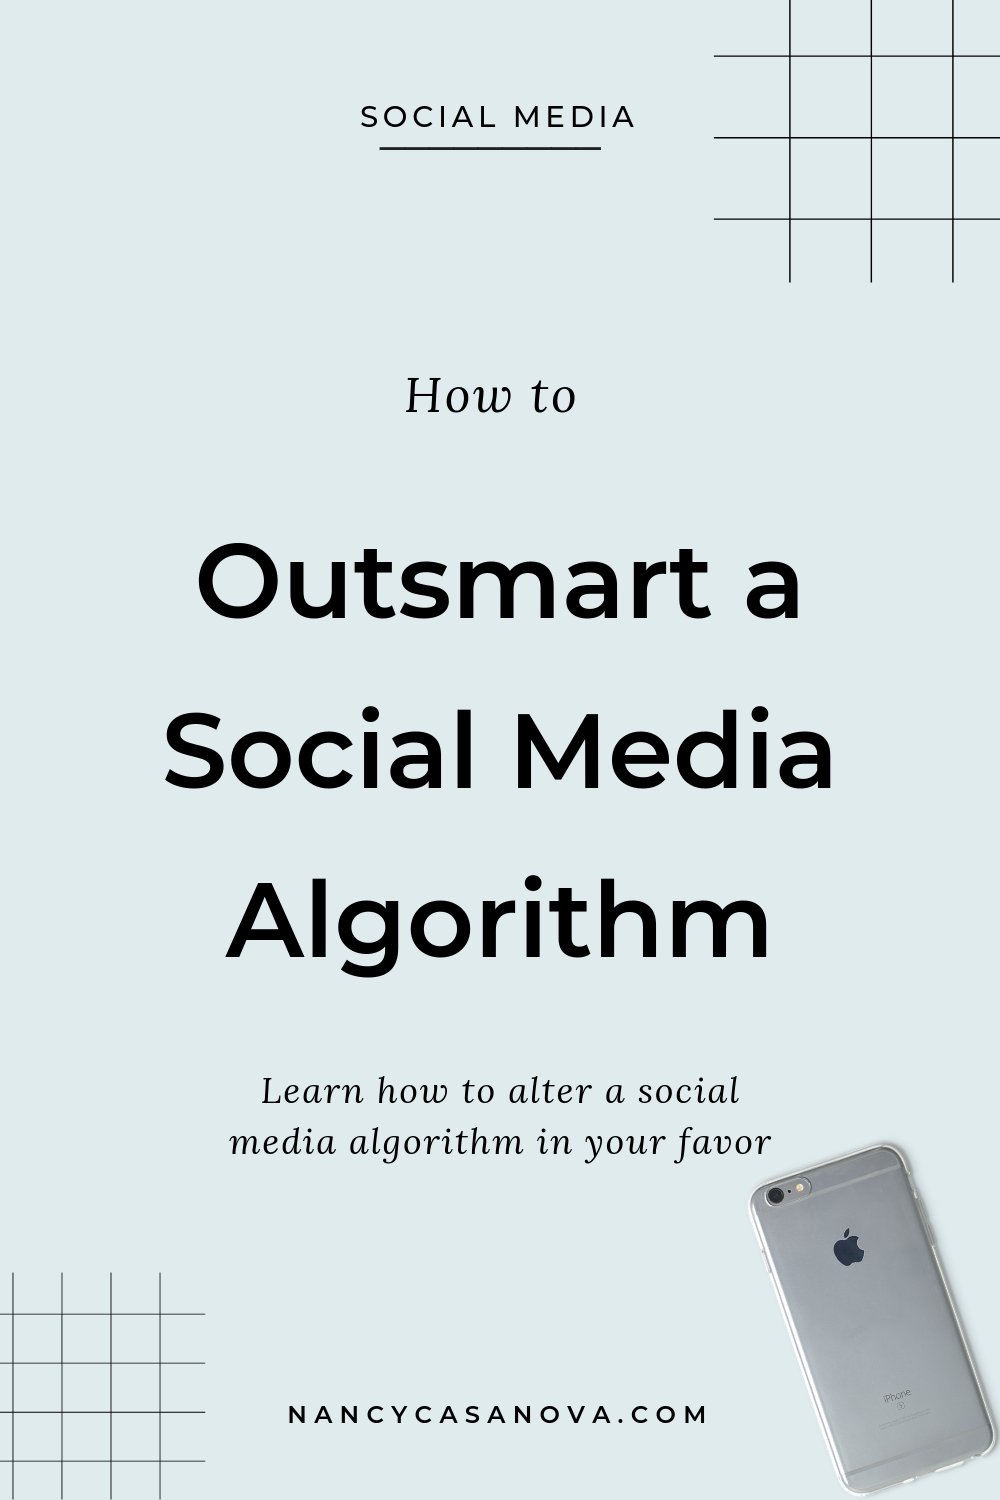 Social media algorithms evolve and can be altered over time if you teach it and send the right signals. Learn the three ways you can outsmart a social media algorithm in your favor. | nancycasanova.com | social media | instagram | social media tips and tricks 

